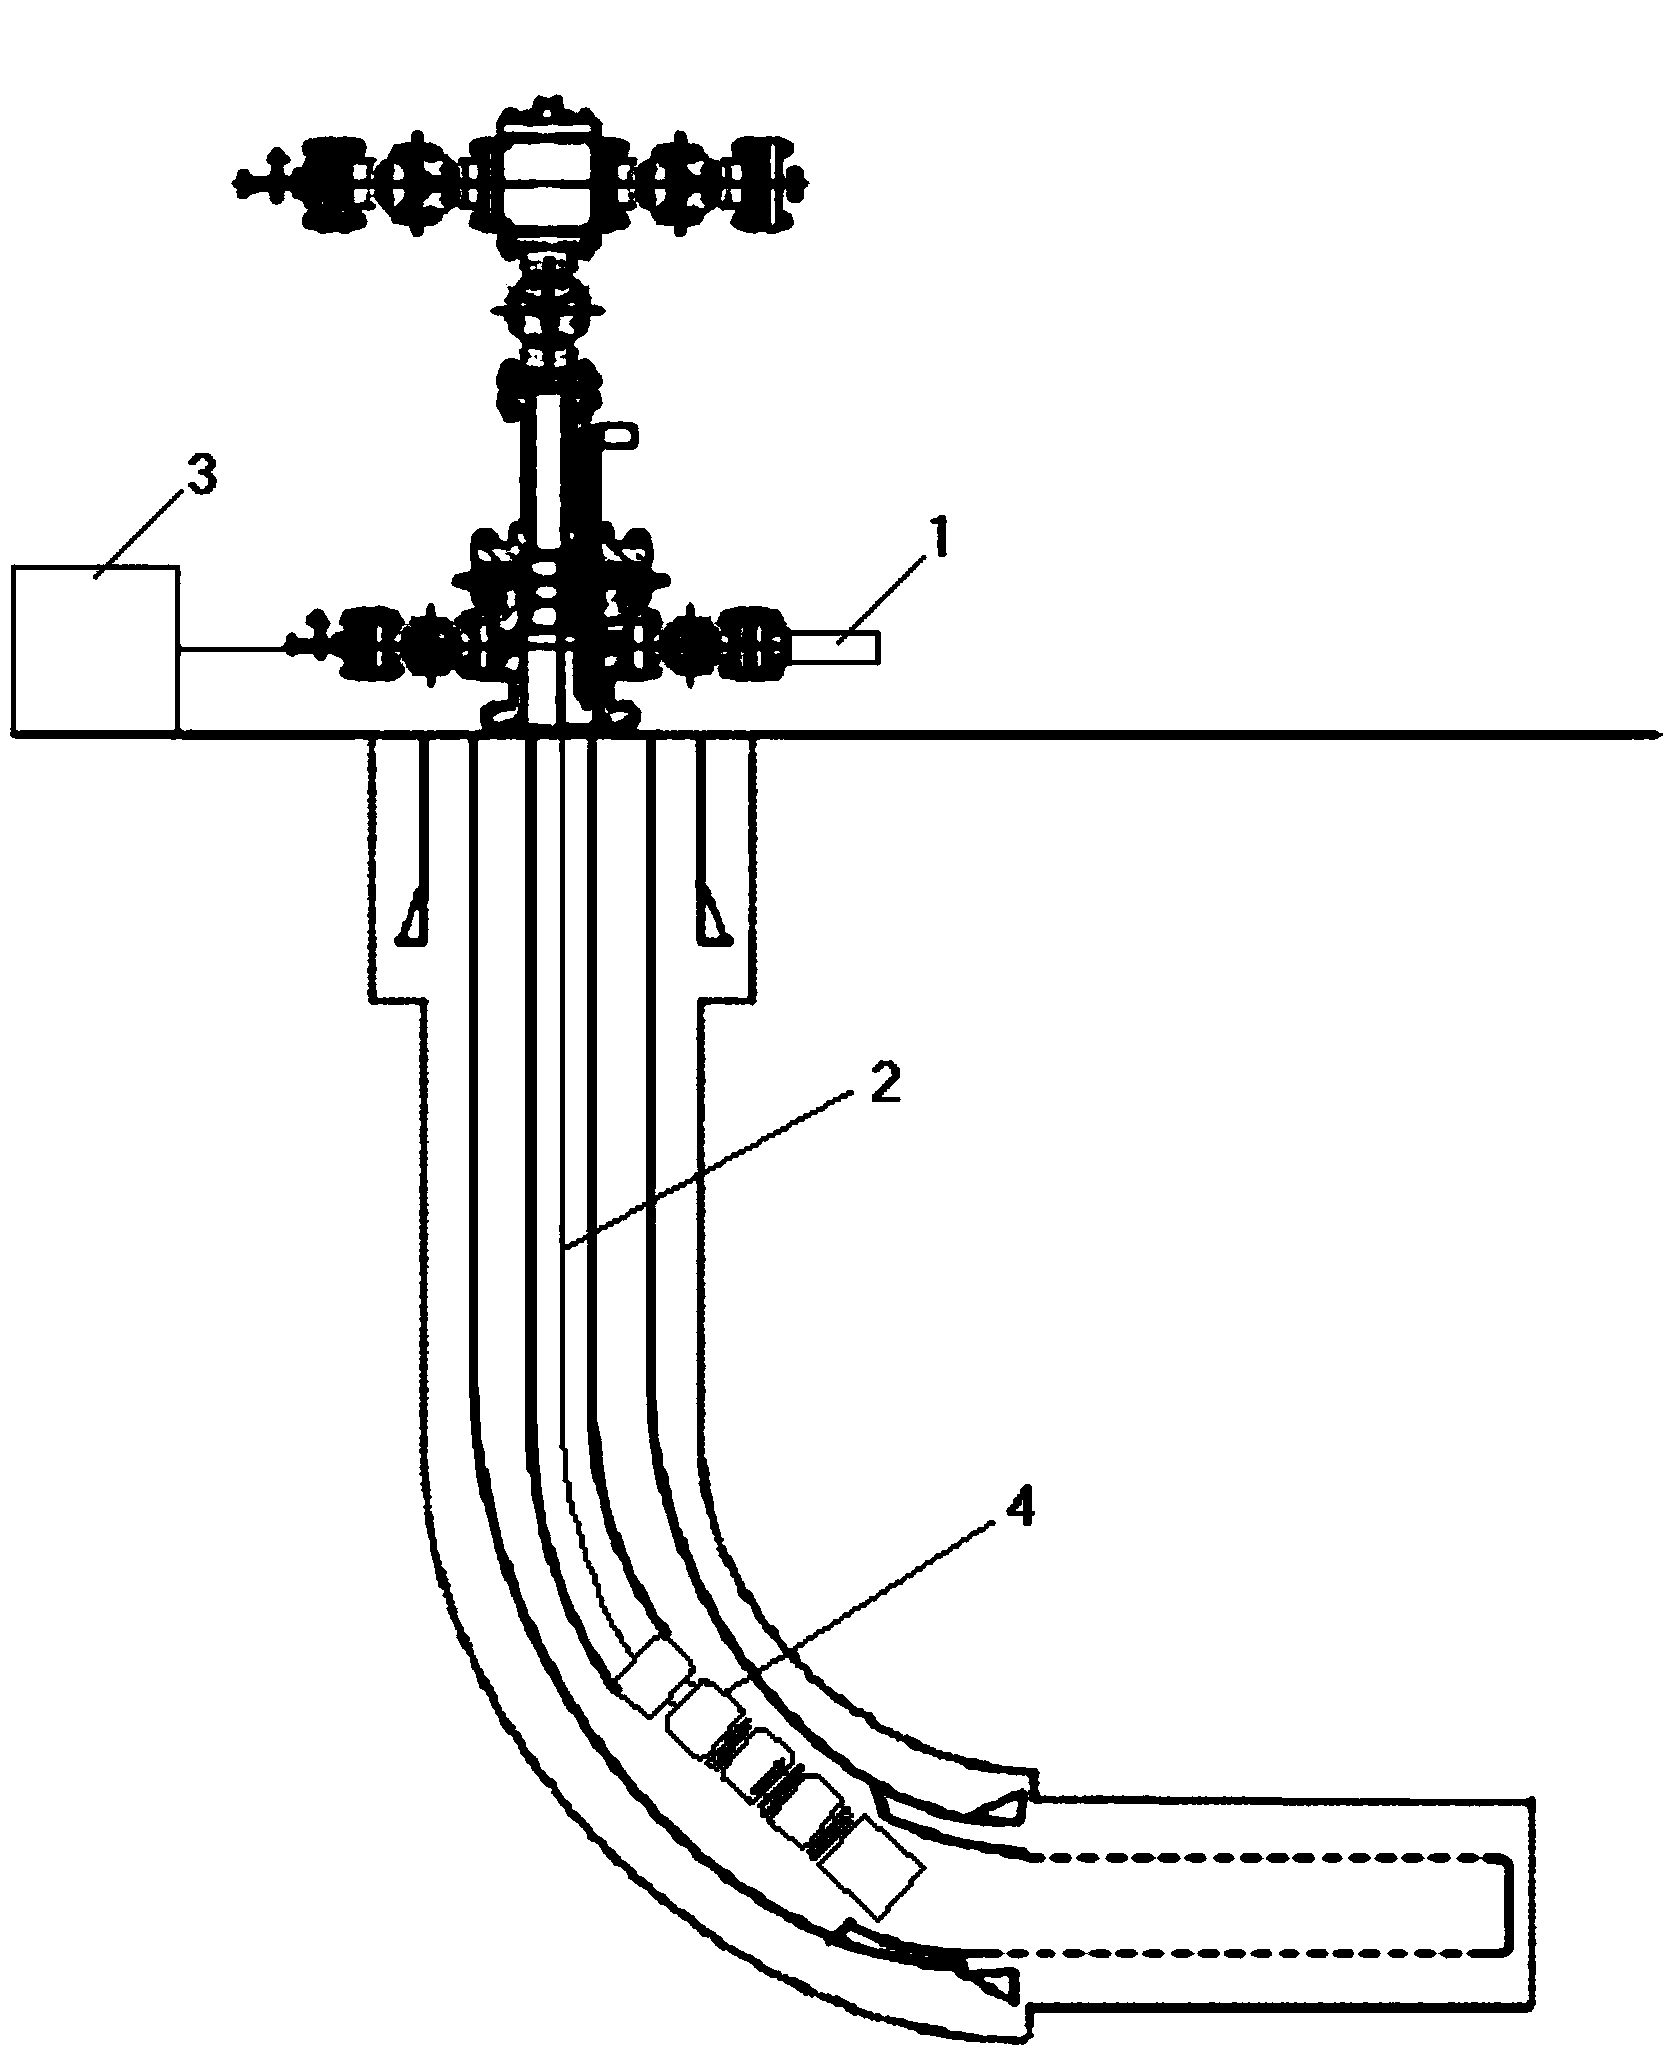 Well control protection device and method for electric submersible pump